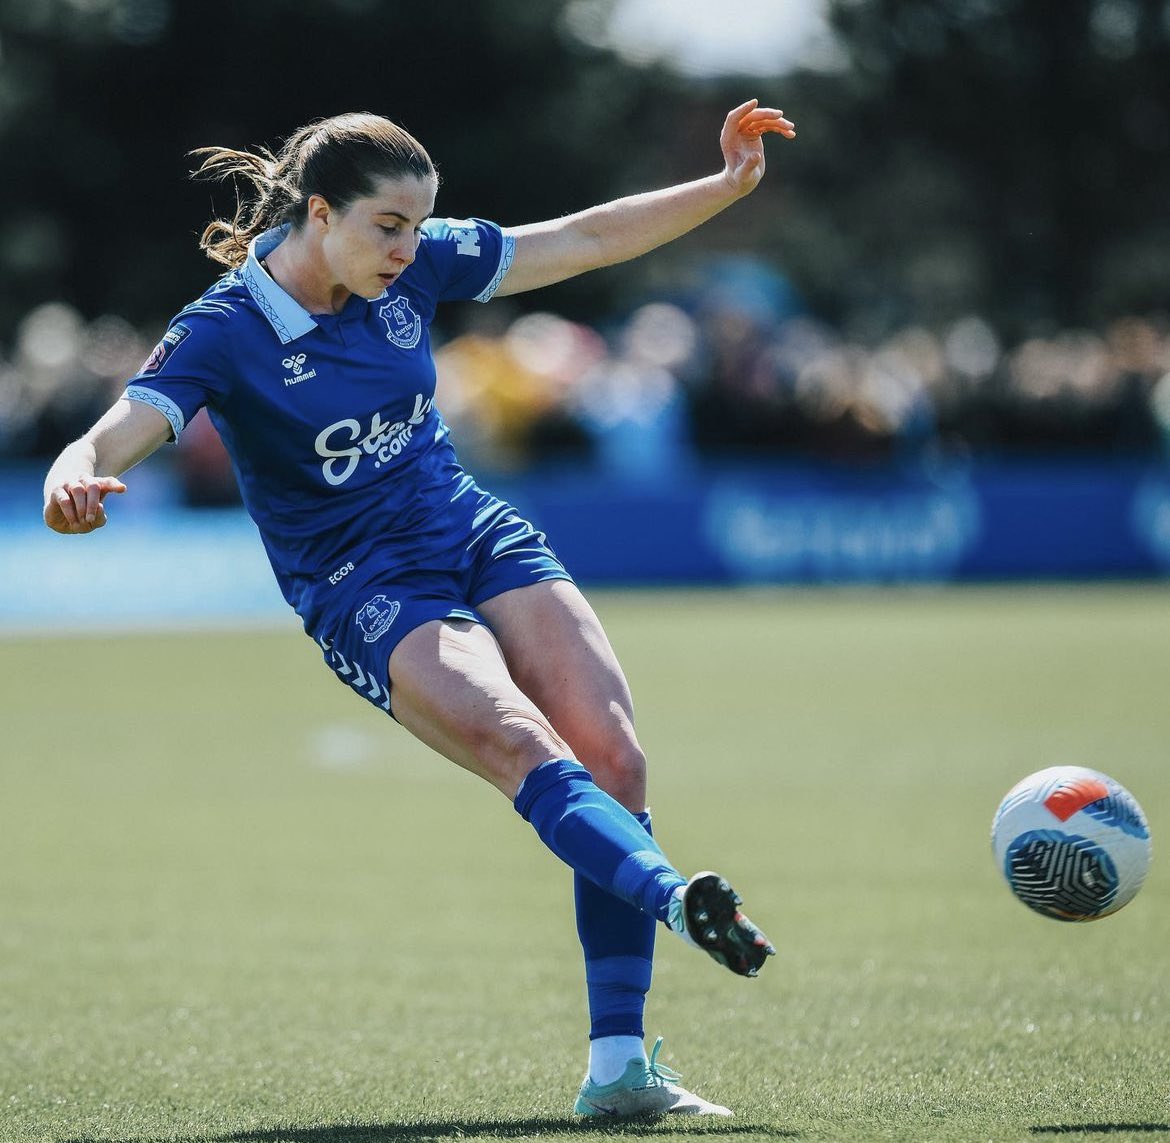 🔥 | A huge congratulations to former Go 2 College Soccer client Emma Bissell who scored her first goal for Everton this past weekend in a 4-0 win over Bristol City.

We are extremely proud of Emma and her first year back in the FAWSL following her time at Florida State